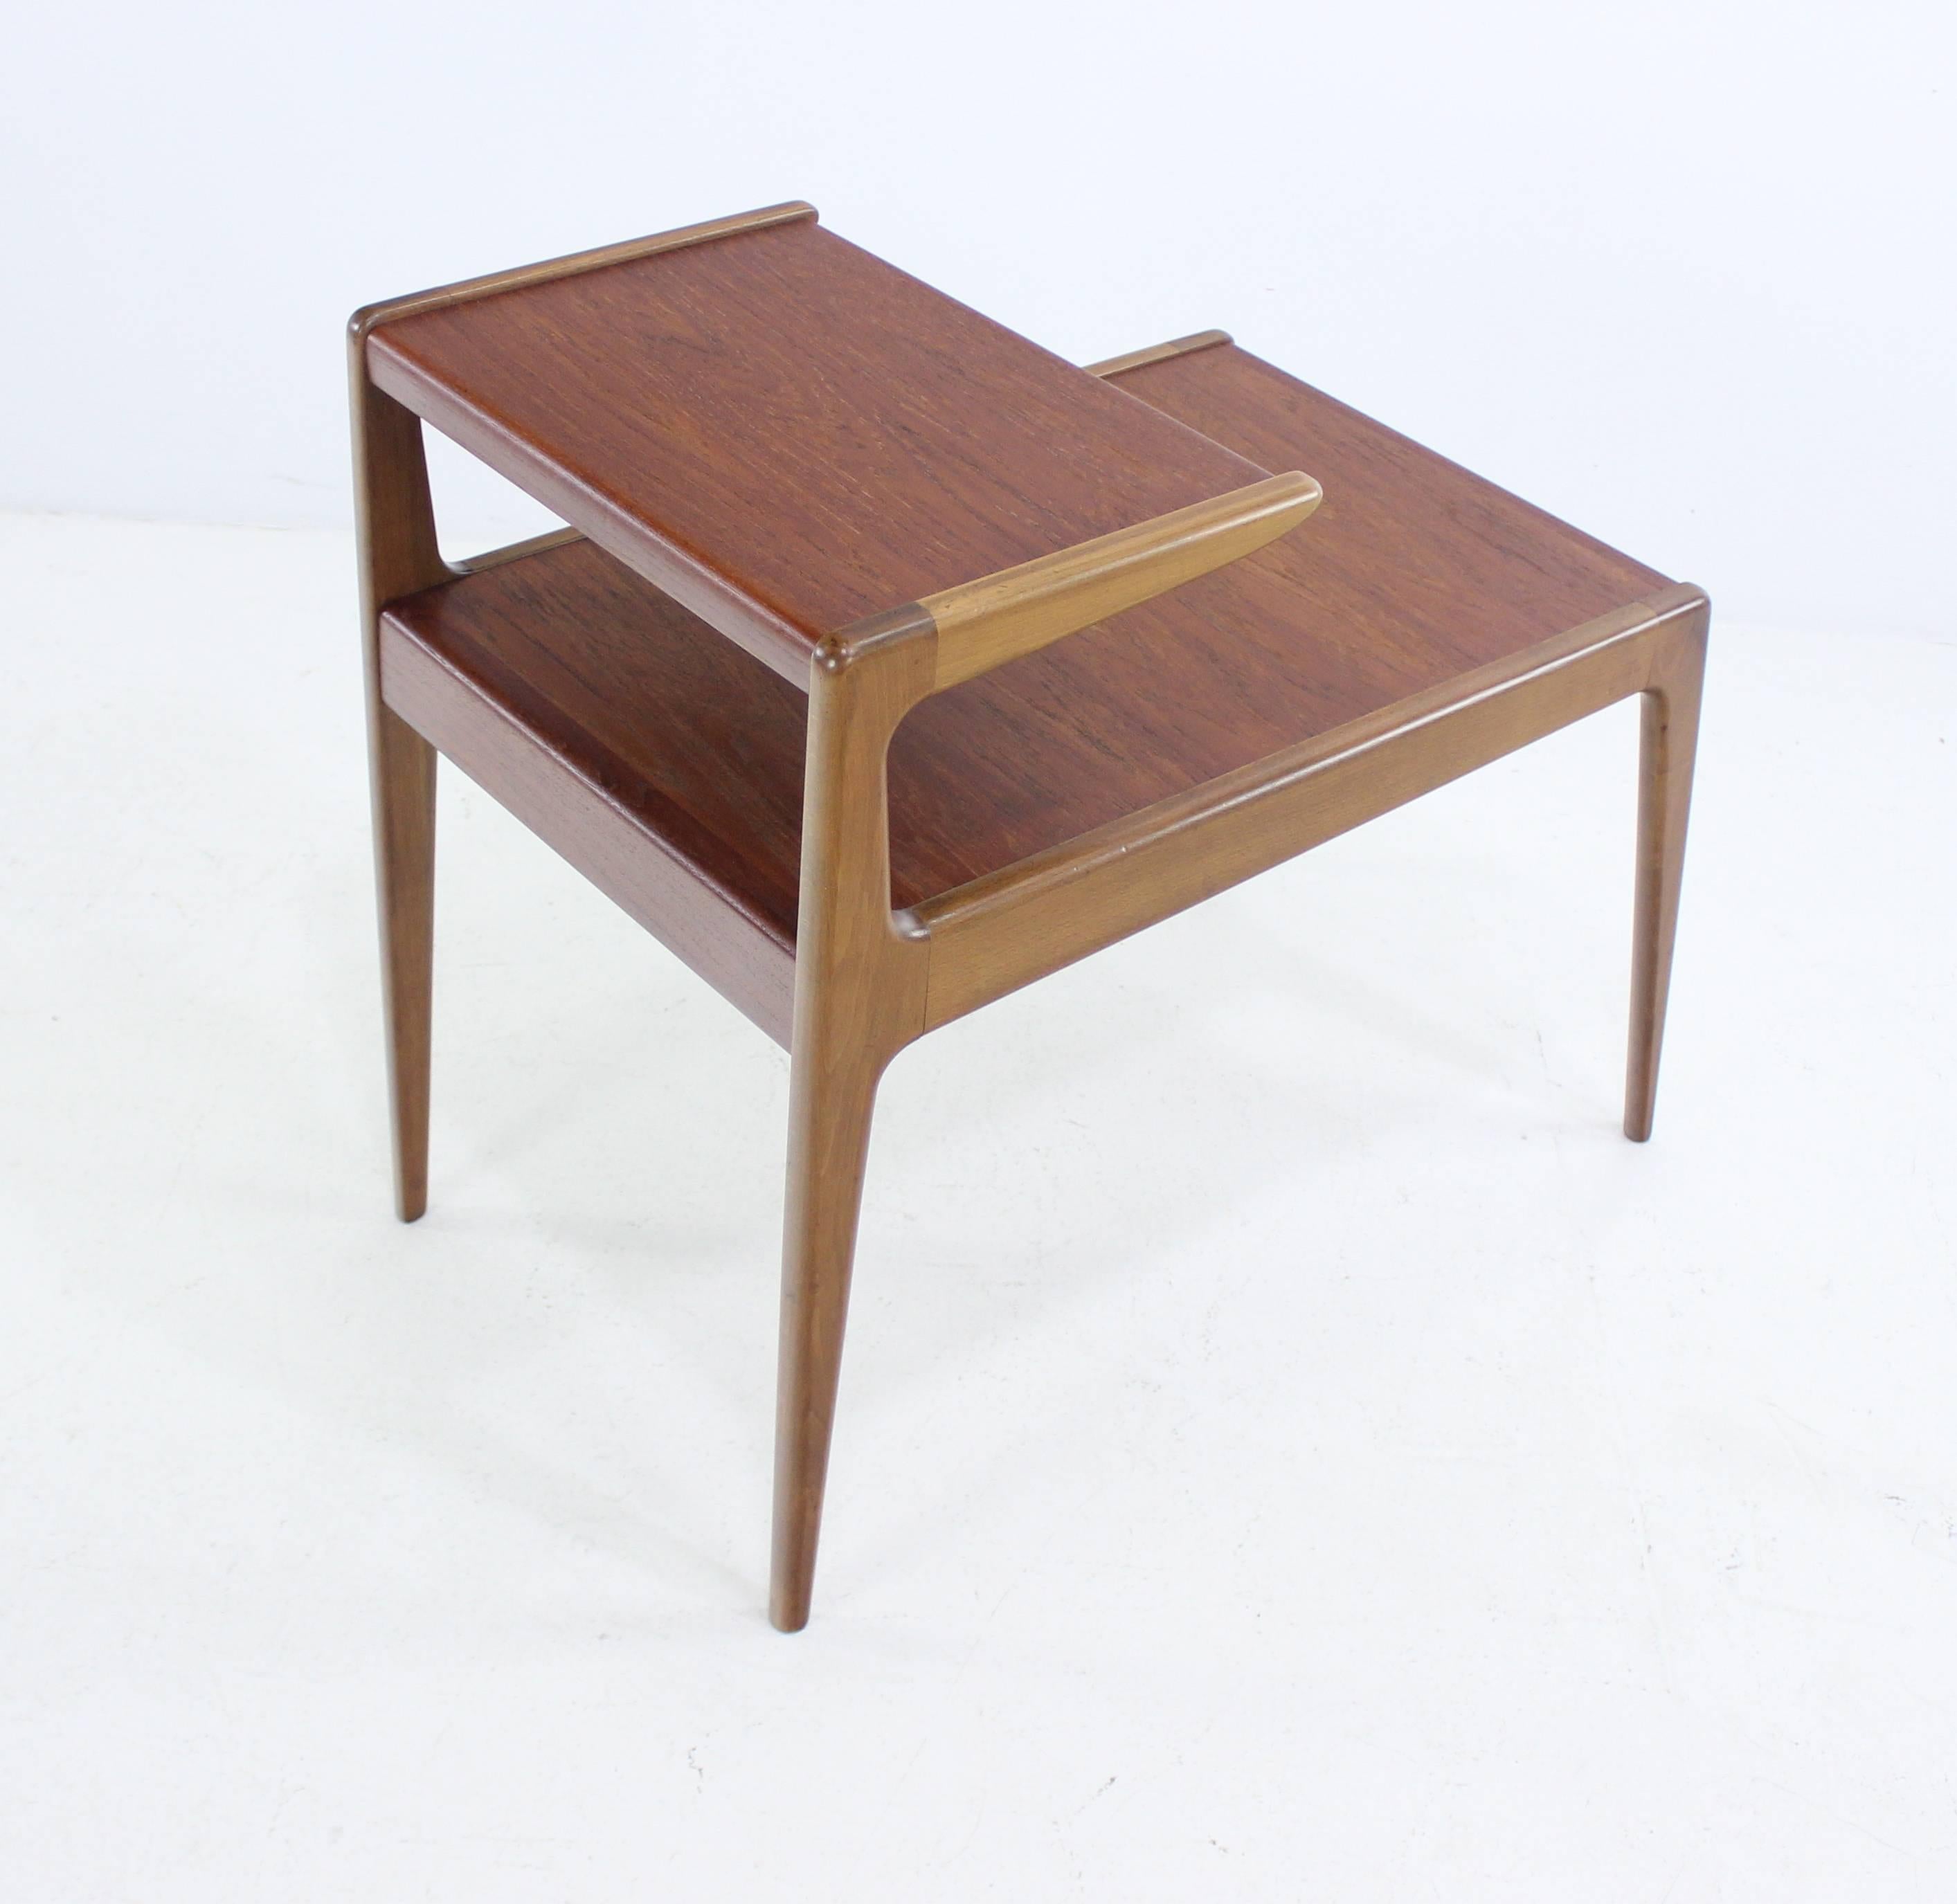 Pair of Danish Modern Teak and Beech End Tables Designed by Kurt Ostervig In Excellent Condition For Sale In Portland, OR